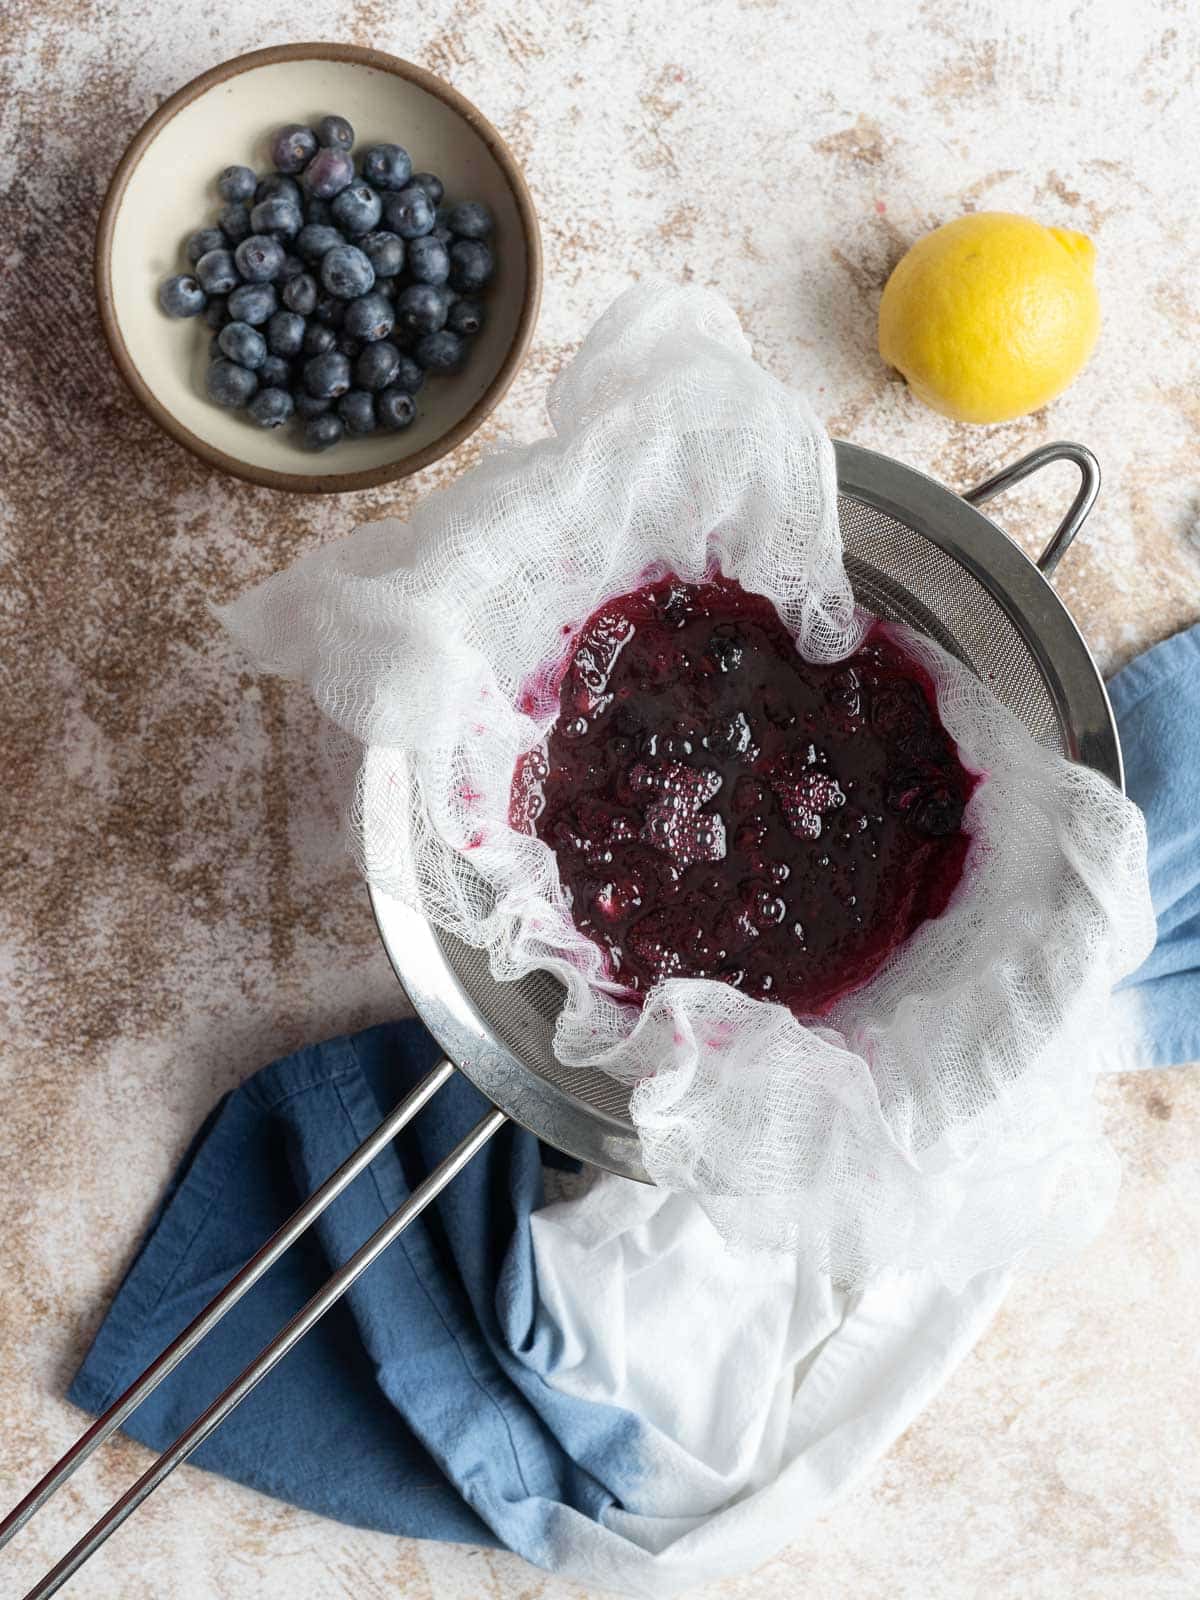 Blueberries in a strainer.